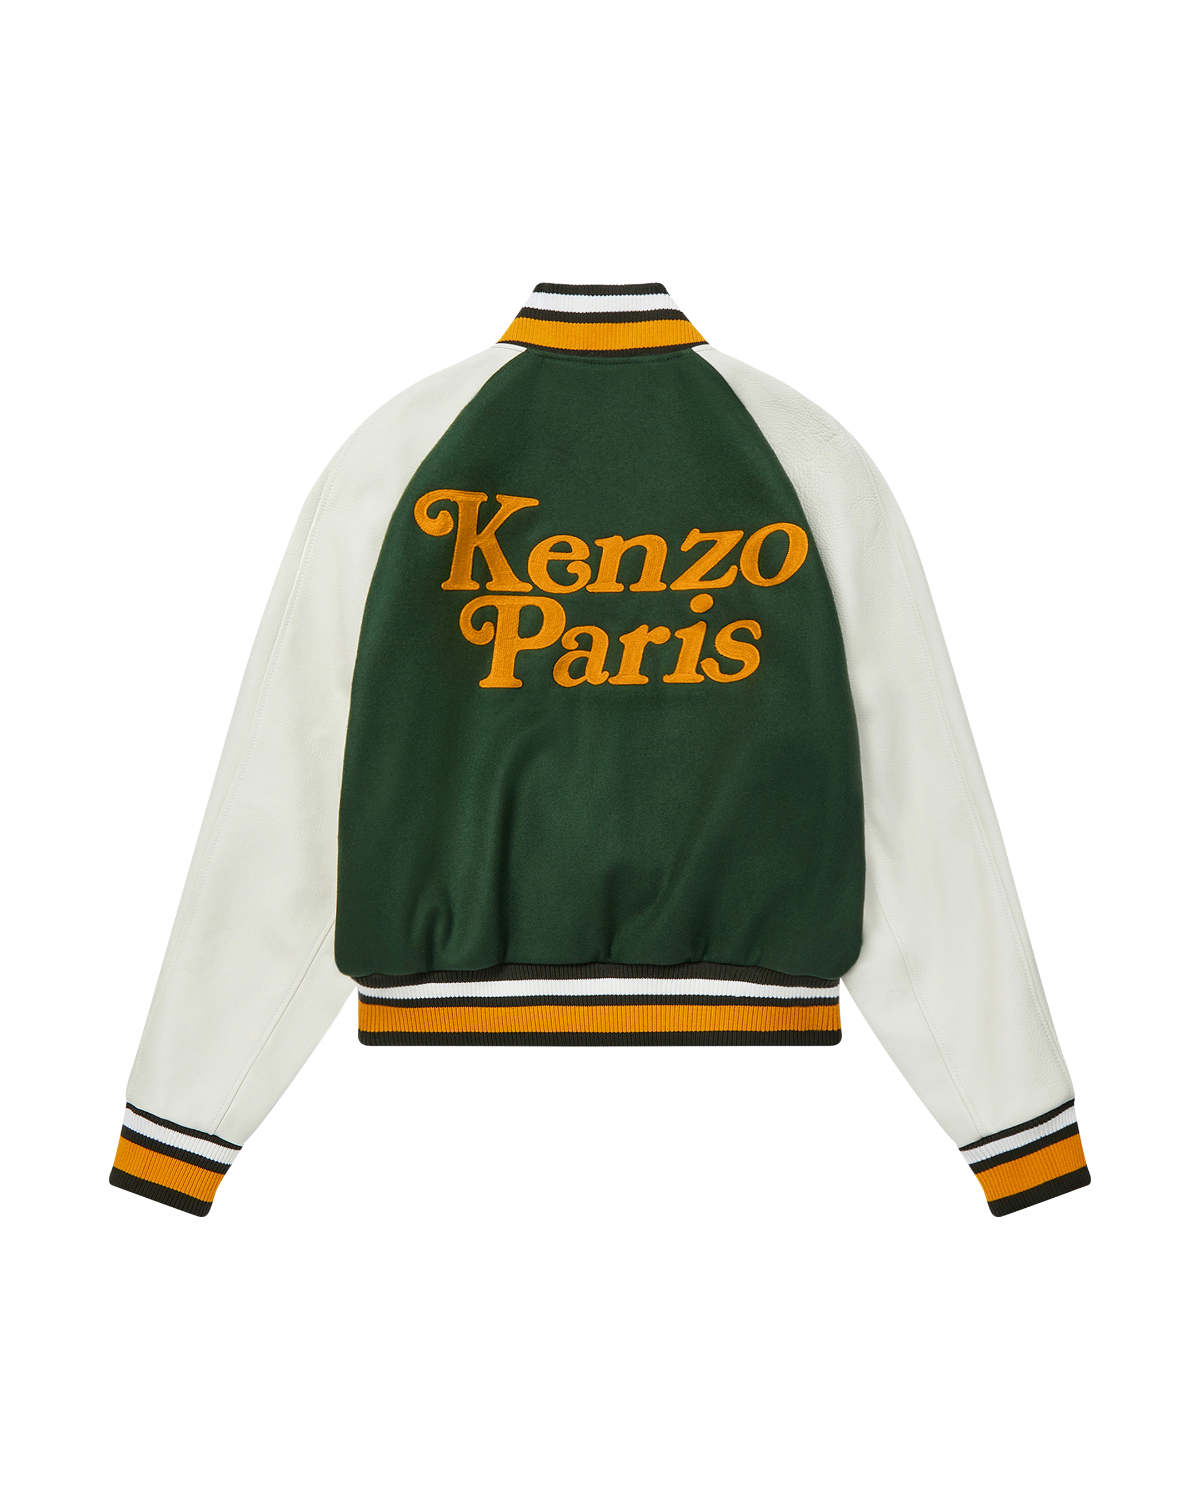 The Kenzo X Verdy Collection